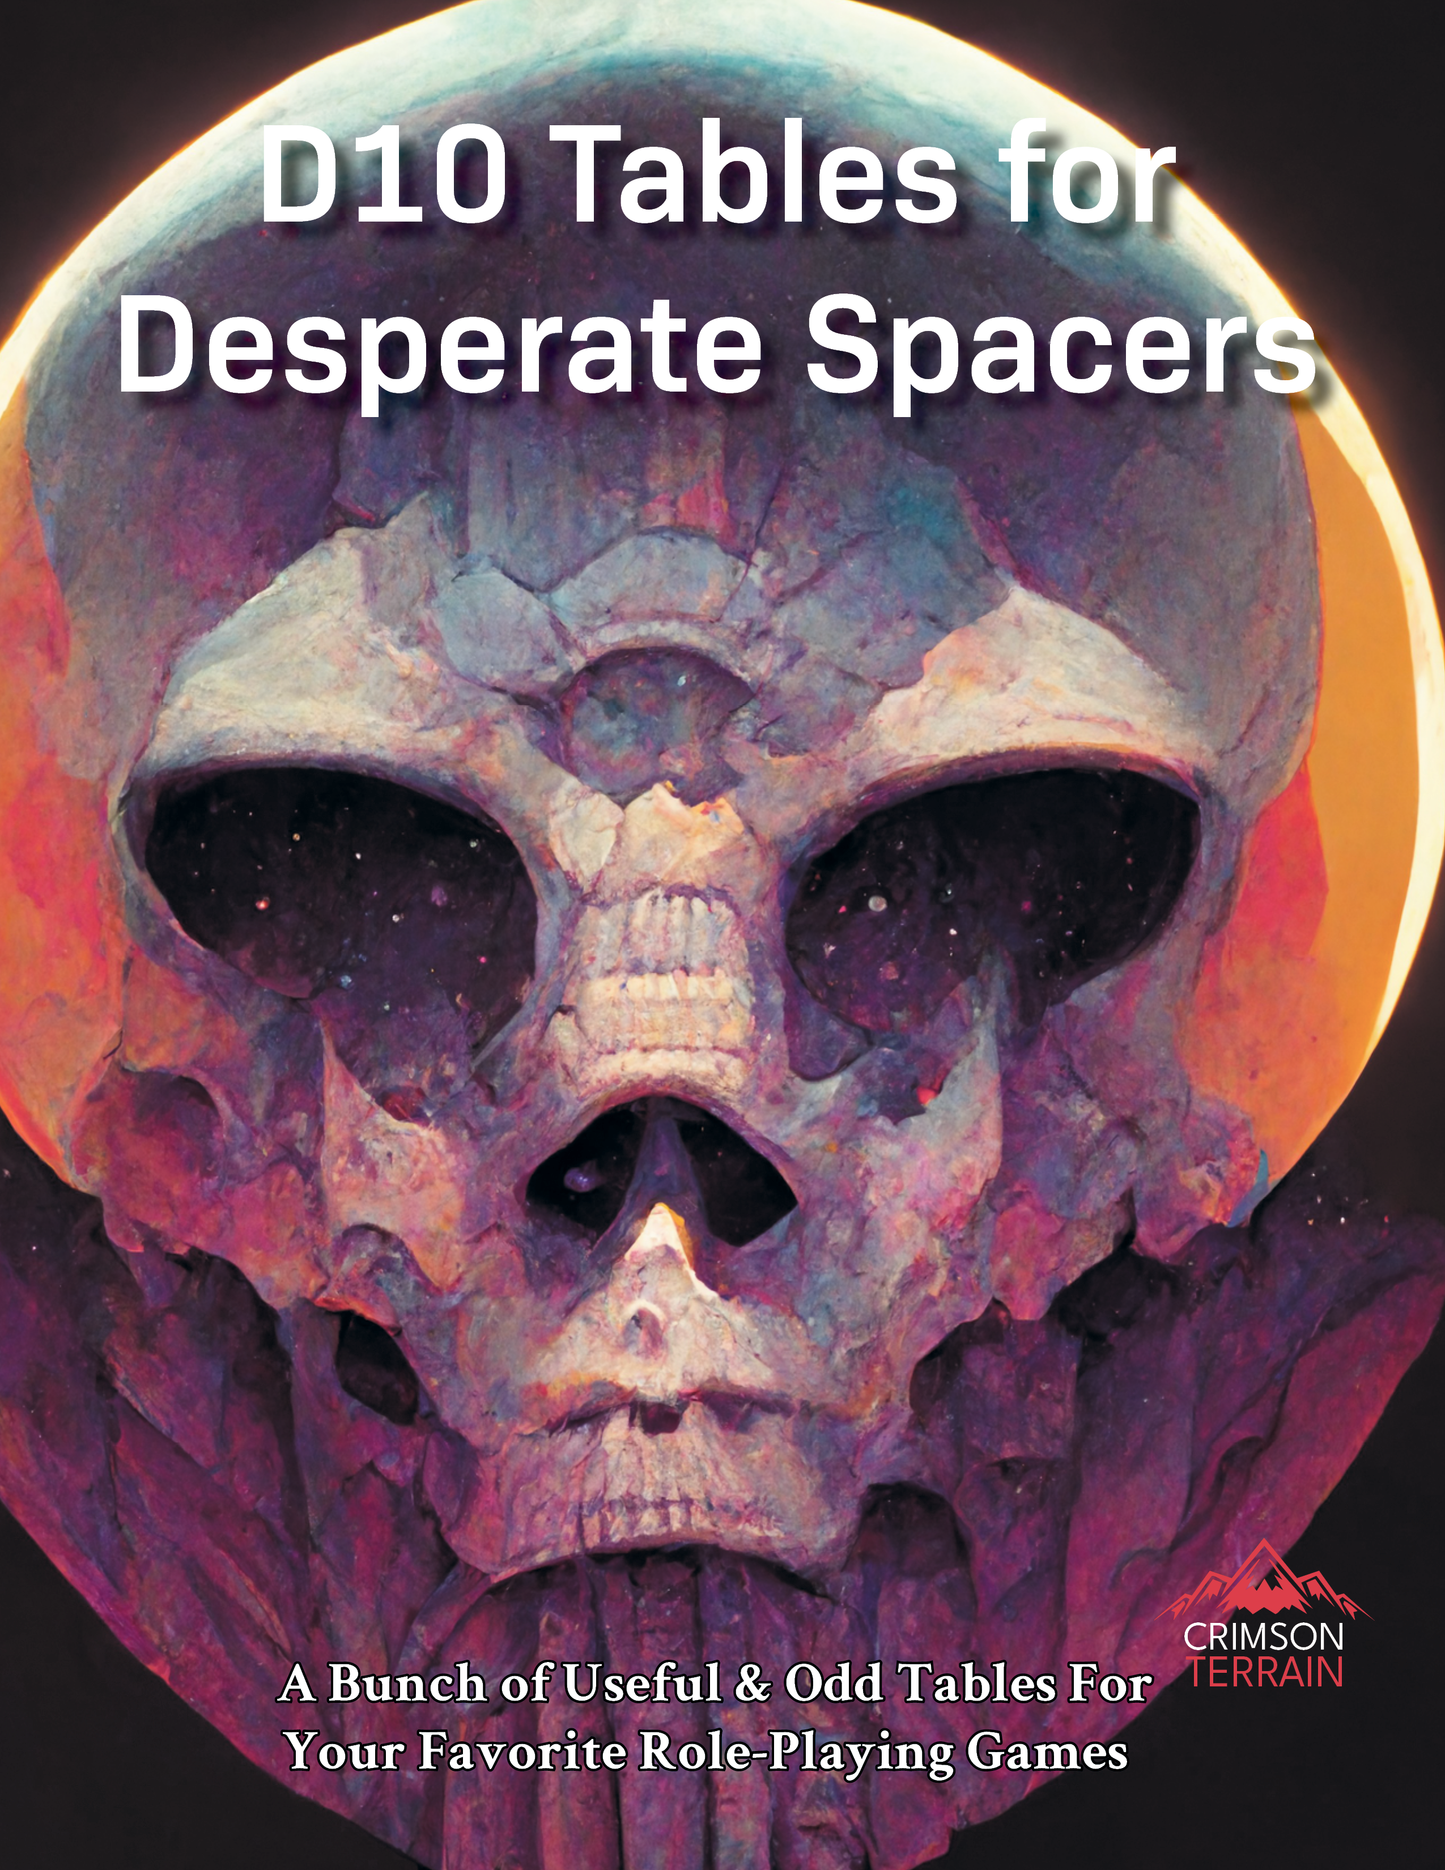 D10 Tables for Desperate Spacers